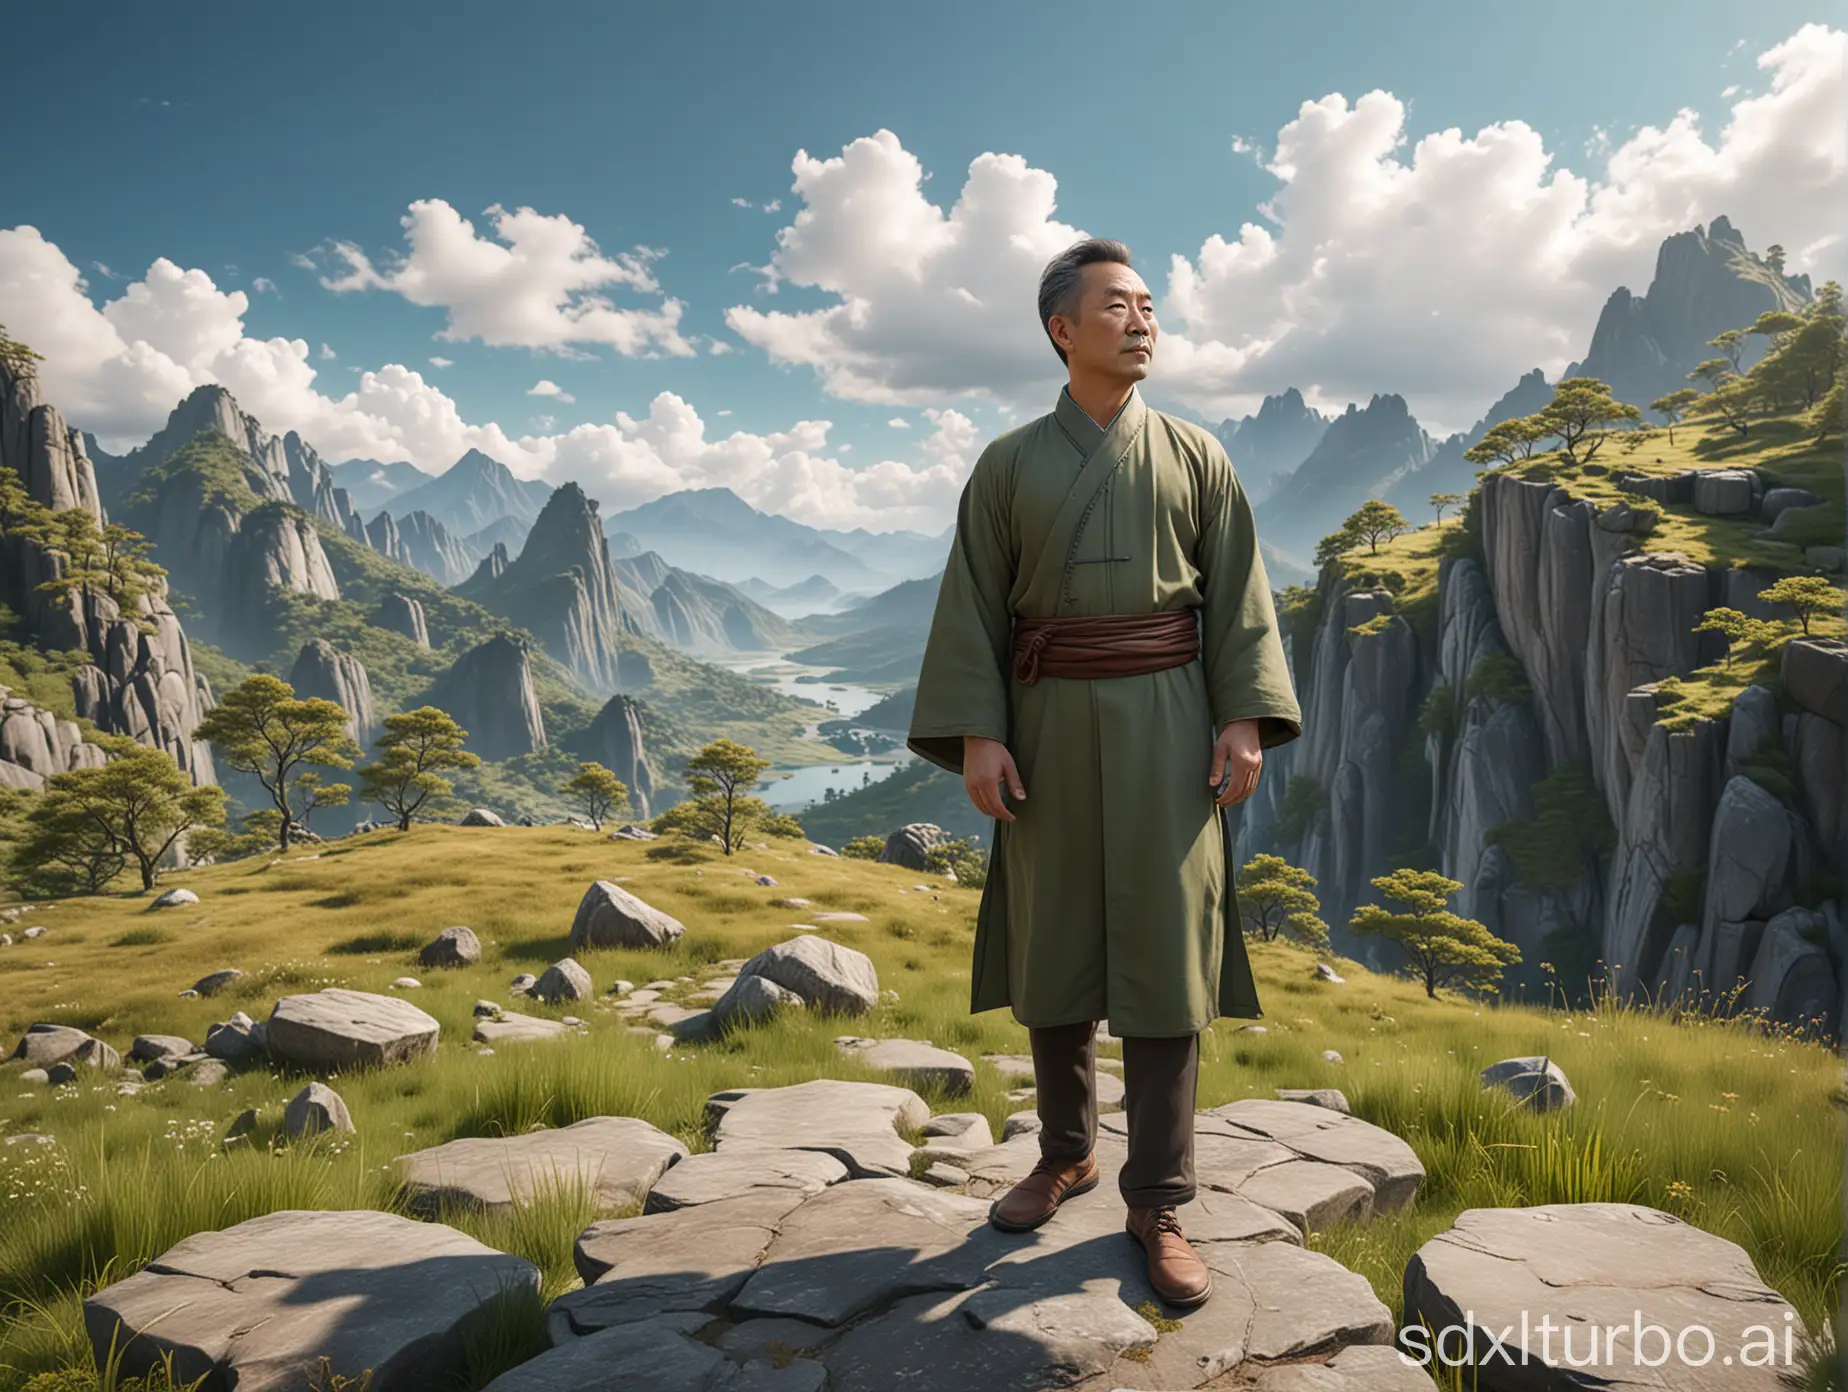 Serene-Oriental-Landscape-Middleaged-Man-in-Traditional-Chinese-Attire-on-Mossy-Mountain-Platform